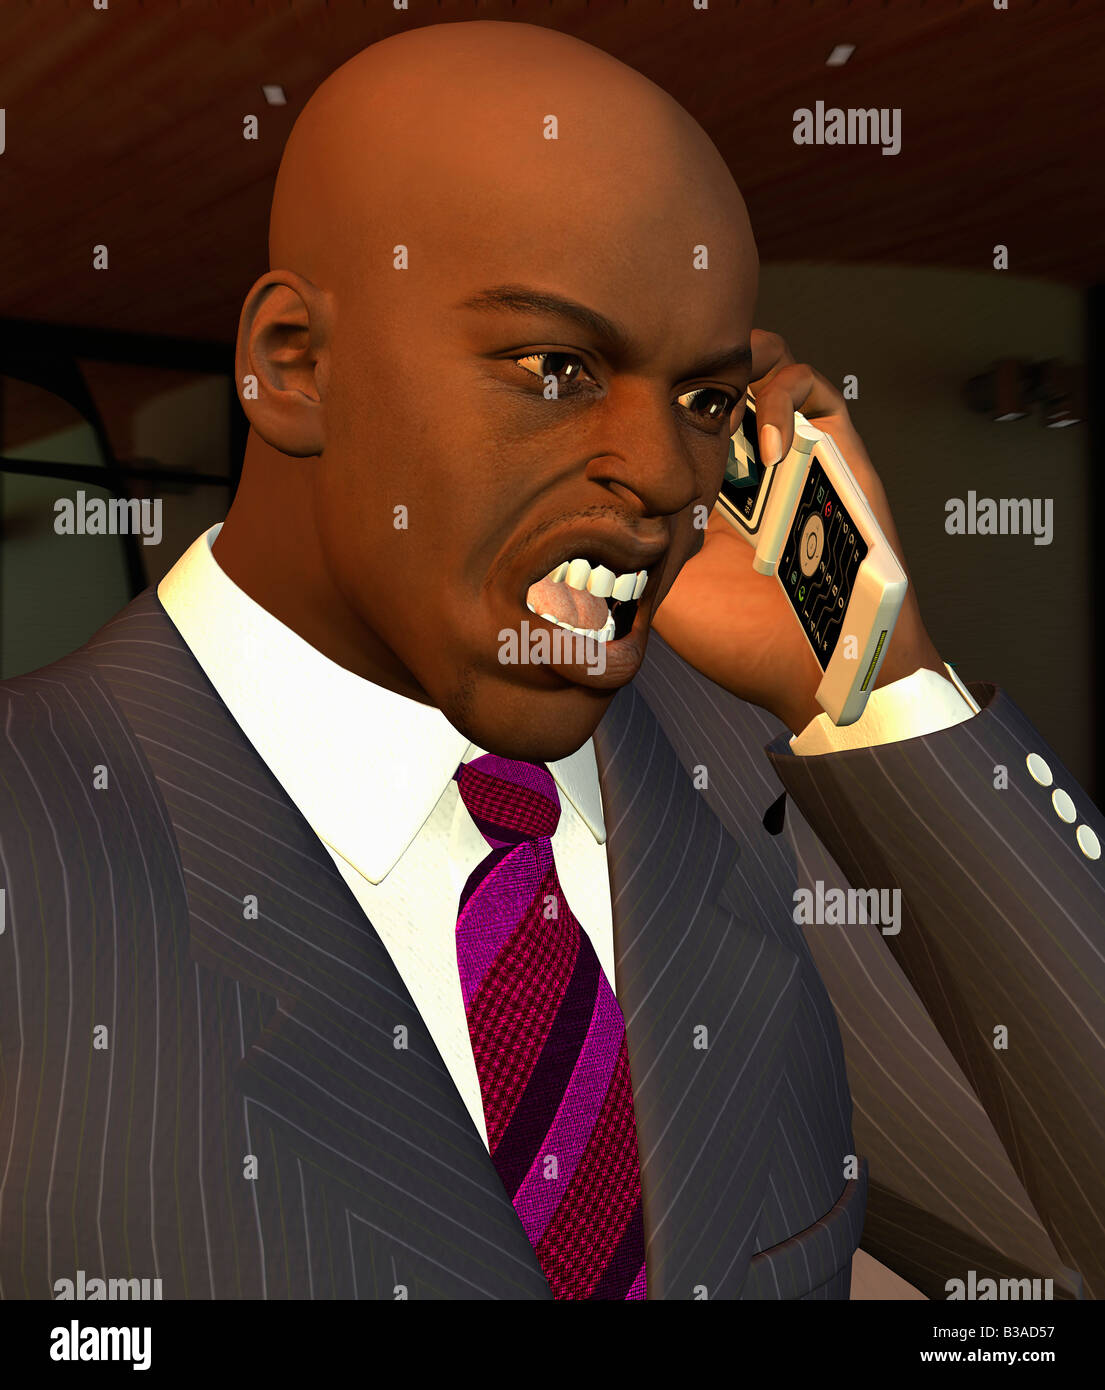 Computer Generated Illustration Of A Businessman Shouting On Mobile Phone Stock Photo